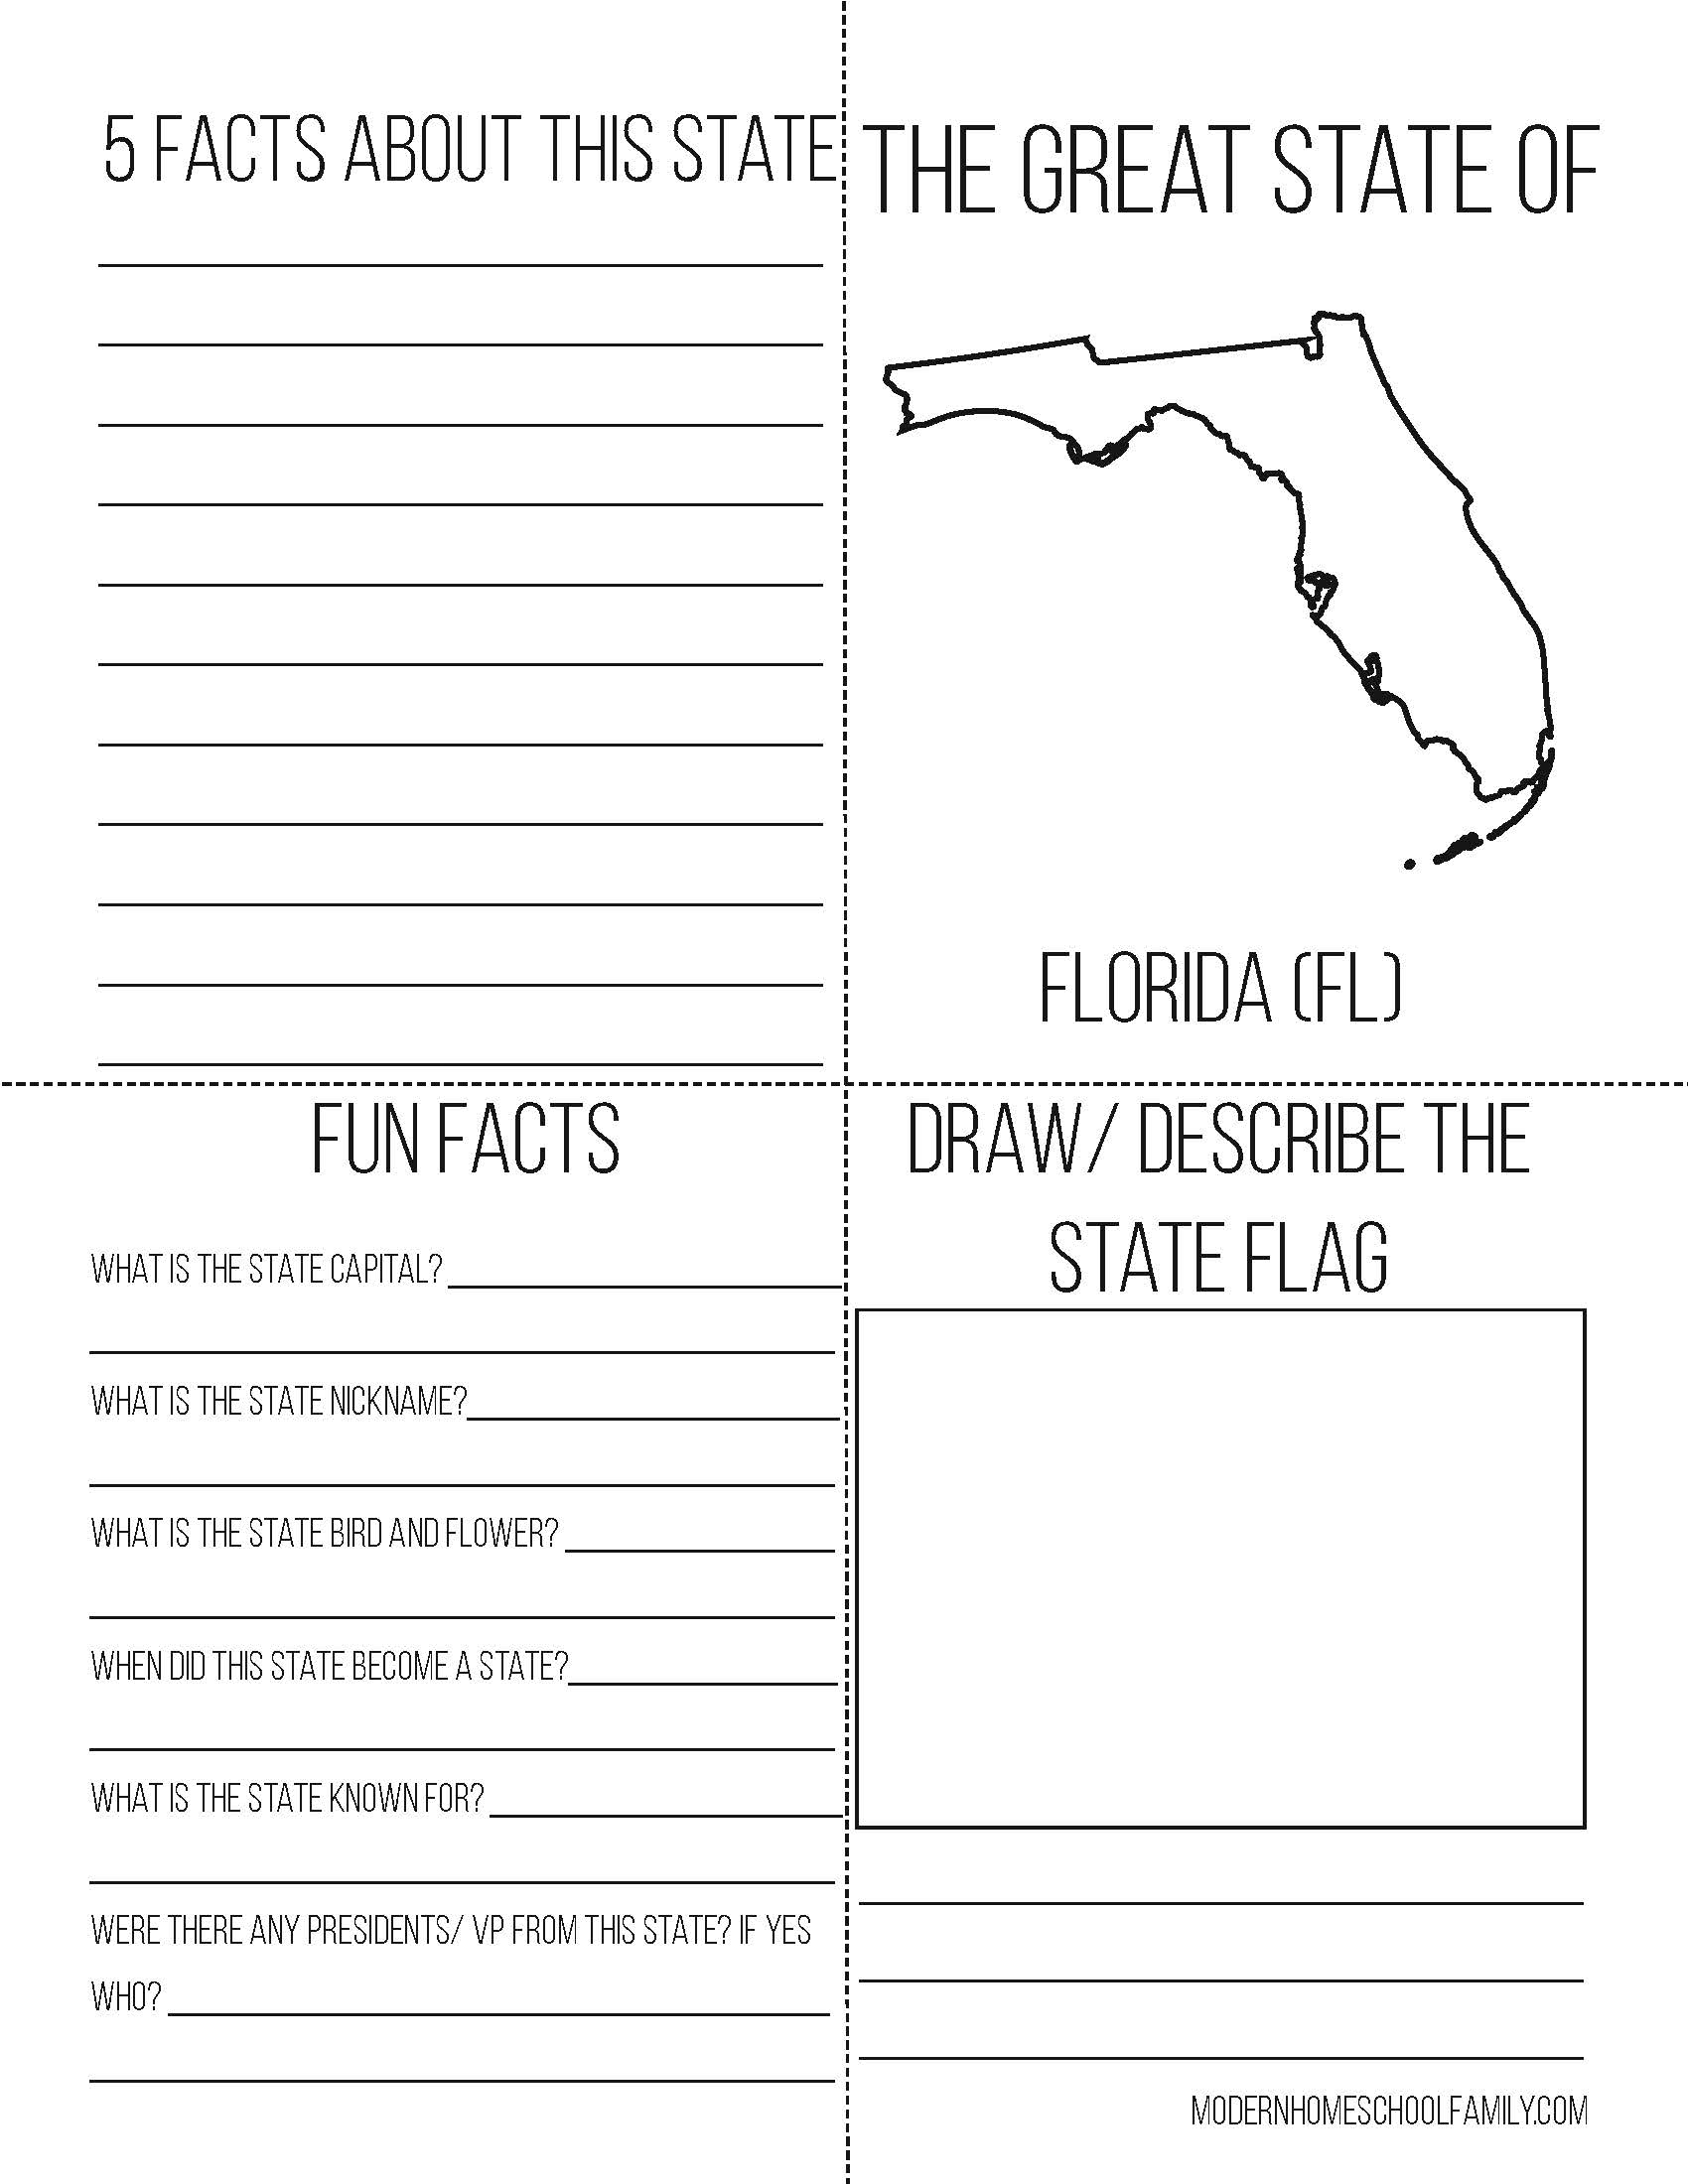 50 States Notebooking Unit for Homeschoolers (B & W)